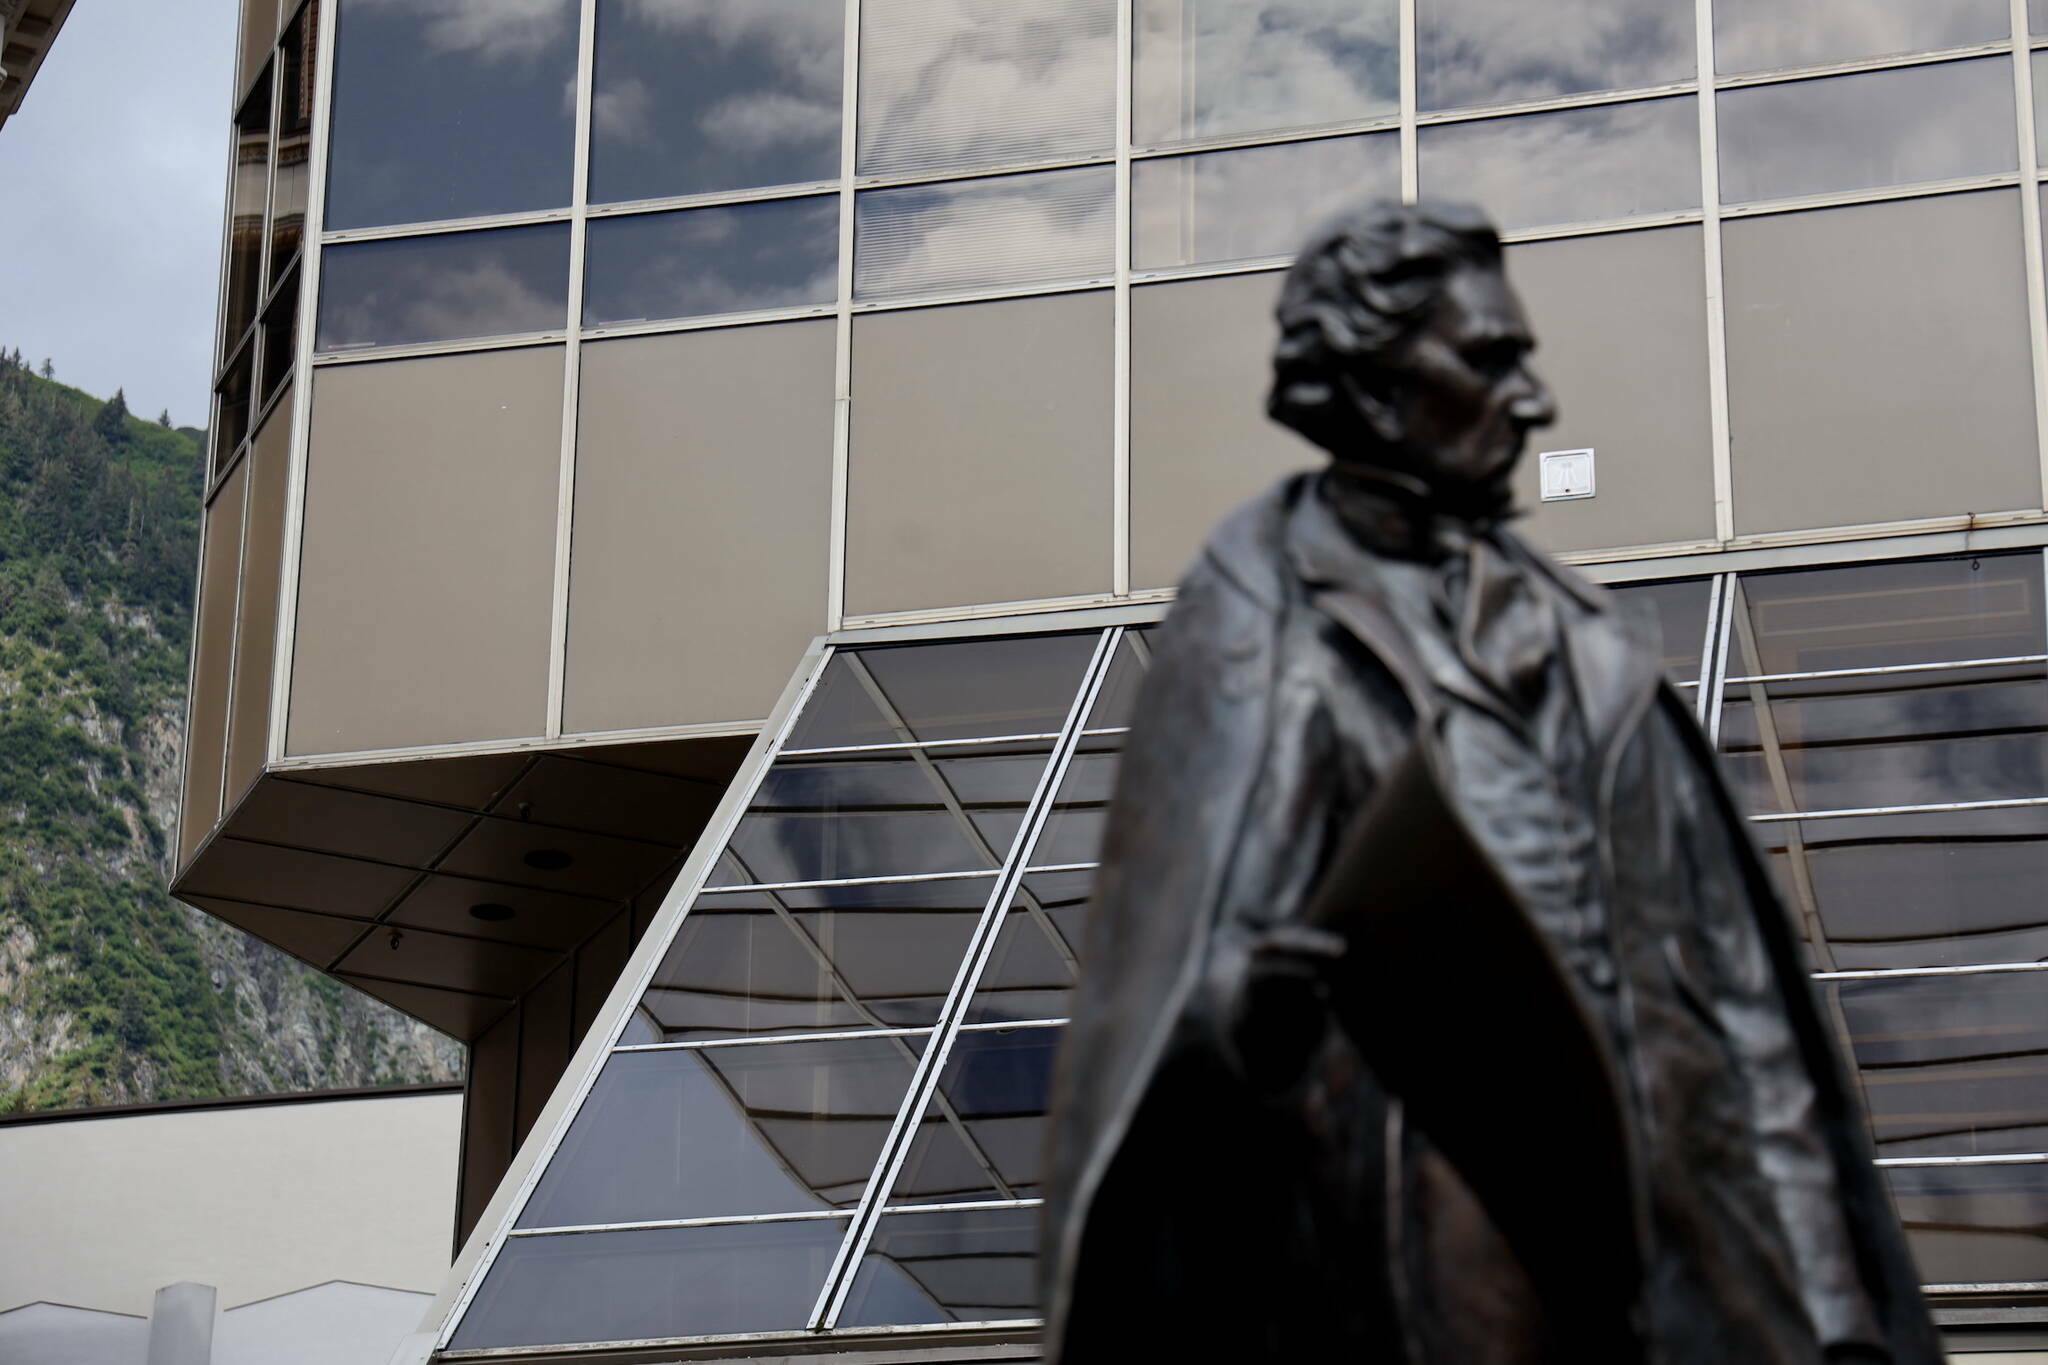 A statue of William Henry Seward stands outside the Dimond Courthouse in downtown Juneau. An appeal in a dispute regarding the Palmer Mine project has been filed in state Superior Court. (Clarise Larson / Juneau Empire File)